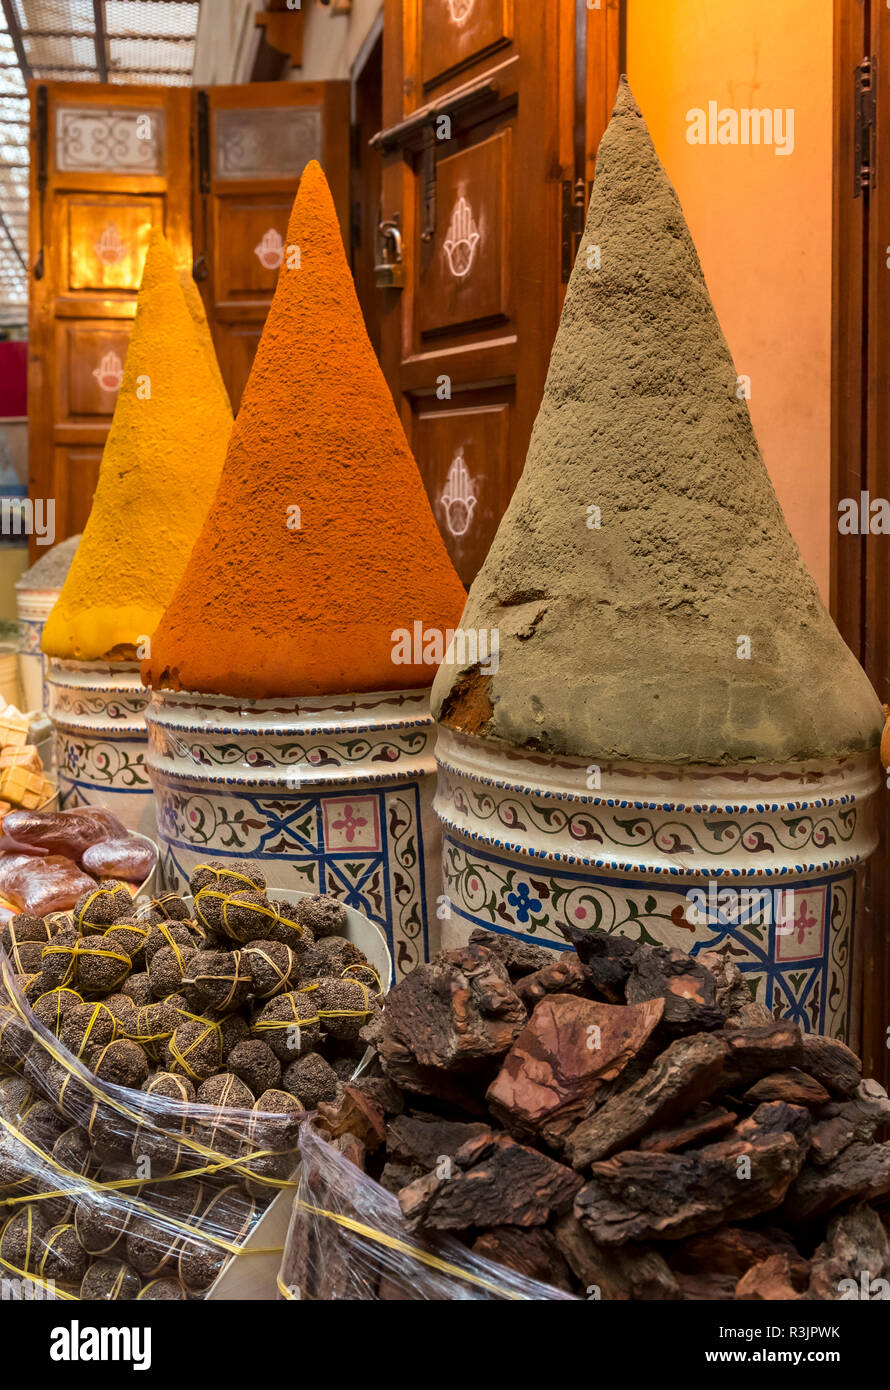 Spices and herbs on sale in Marrakech market, Marrakesh, Morocco Stock Photo